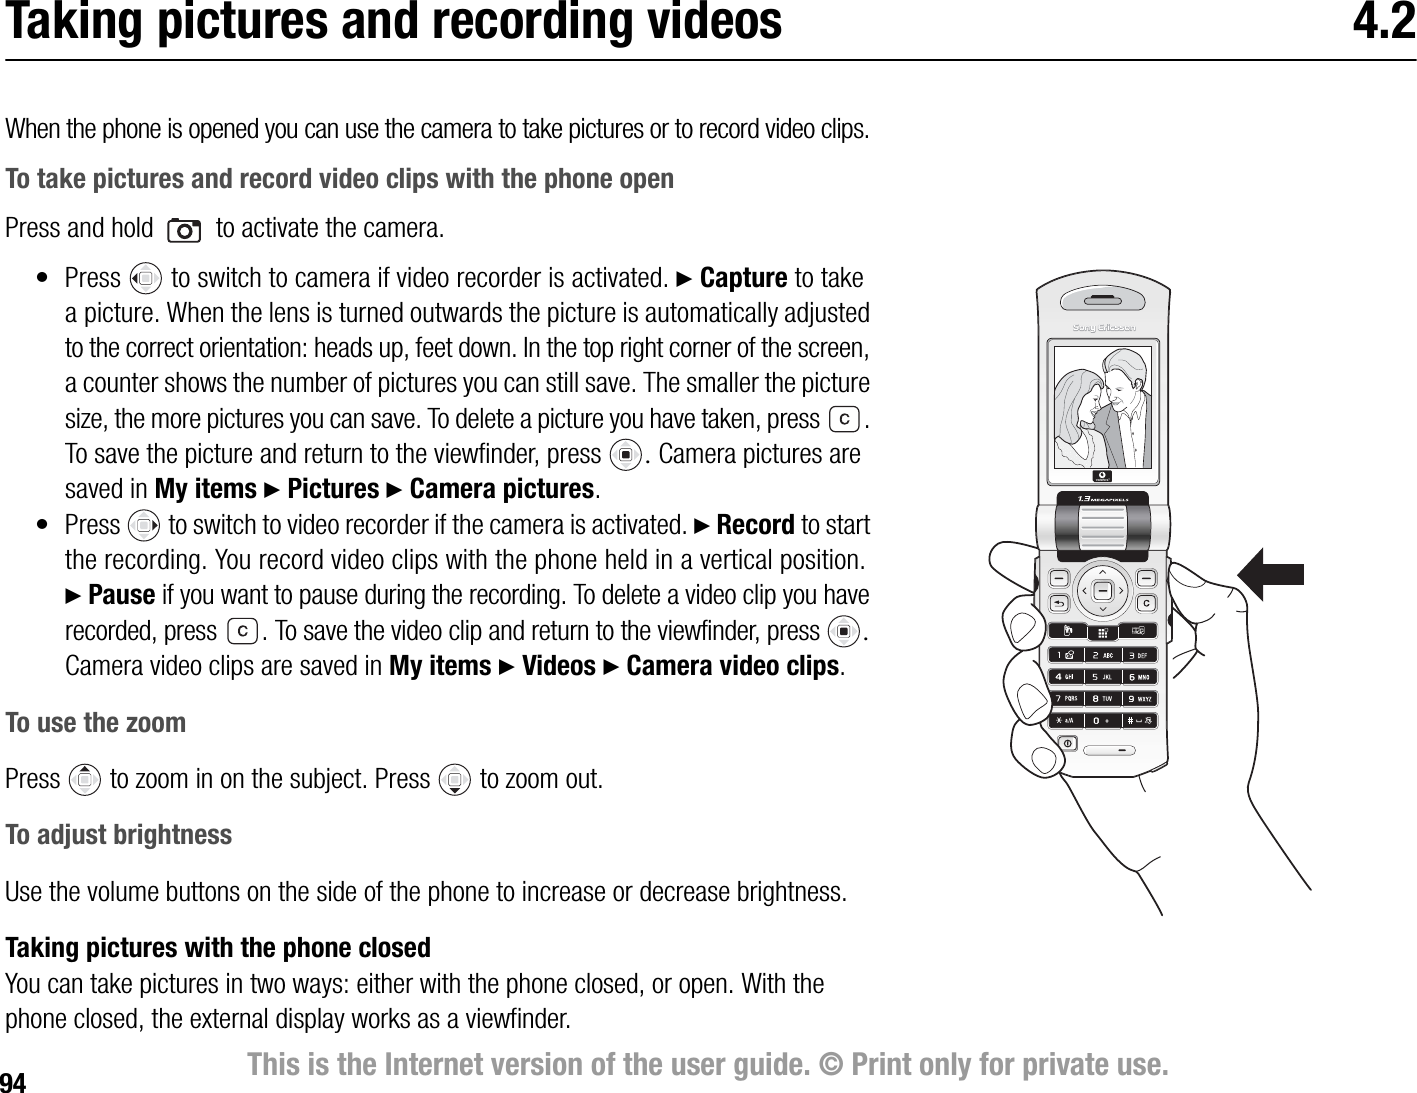 94 This is the Internet version of the user guide. © Print only for private use.Taking pictures and recording videos 4.2When the phone is opened you can use the camera to take pictures or to record video clips.To take pictures and record video clips with the phone openPress and hold   to activate the camera.• Press   to switch to camera if video recorder is activated. } Capture to take a picture. When the lens is turned outwards the picture is automatically adjusted to the correct orientation: heads up, feet down. In the top right corner of the screen, a counter shows the number of pictures you can still save. The smaller the picture size, the more pictures you can save. To delete a picture you have taken, press  . To save the picture and return to the viewfinder, press  Camera pictures are saved in My items } Pictures } Camera pictures.• Press   to switch to video recorder if the camera is activated. } Record to start the recording. You record video clips with the phone held in a vertical position. } Pause if you want to pause during the recording. To delete a video clip you have recorded, press  .To save the video clip and return to the viewfinder, press  Camera video clips are saved in My items } Videos } Camera video clips.To use the zoomPress   to zoom in on the subject. Press   to zoom out.To adjust brightnessUse the volume buttons on the side of the phone to increase or decrease brightness.Taking pictures with the phone closedYou can take pictures in two ways: either with the phone closed, or open. With the phone closed, the external display works as a viewfinder.